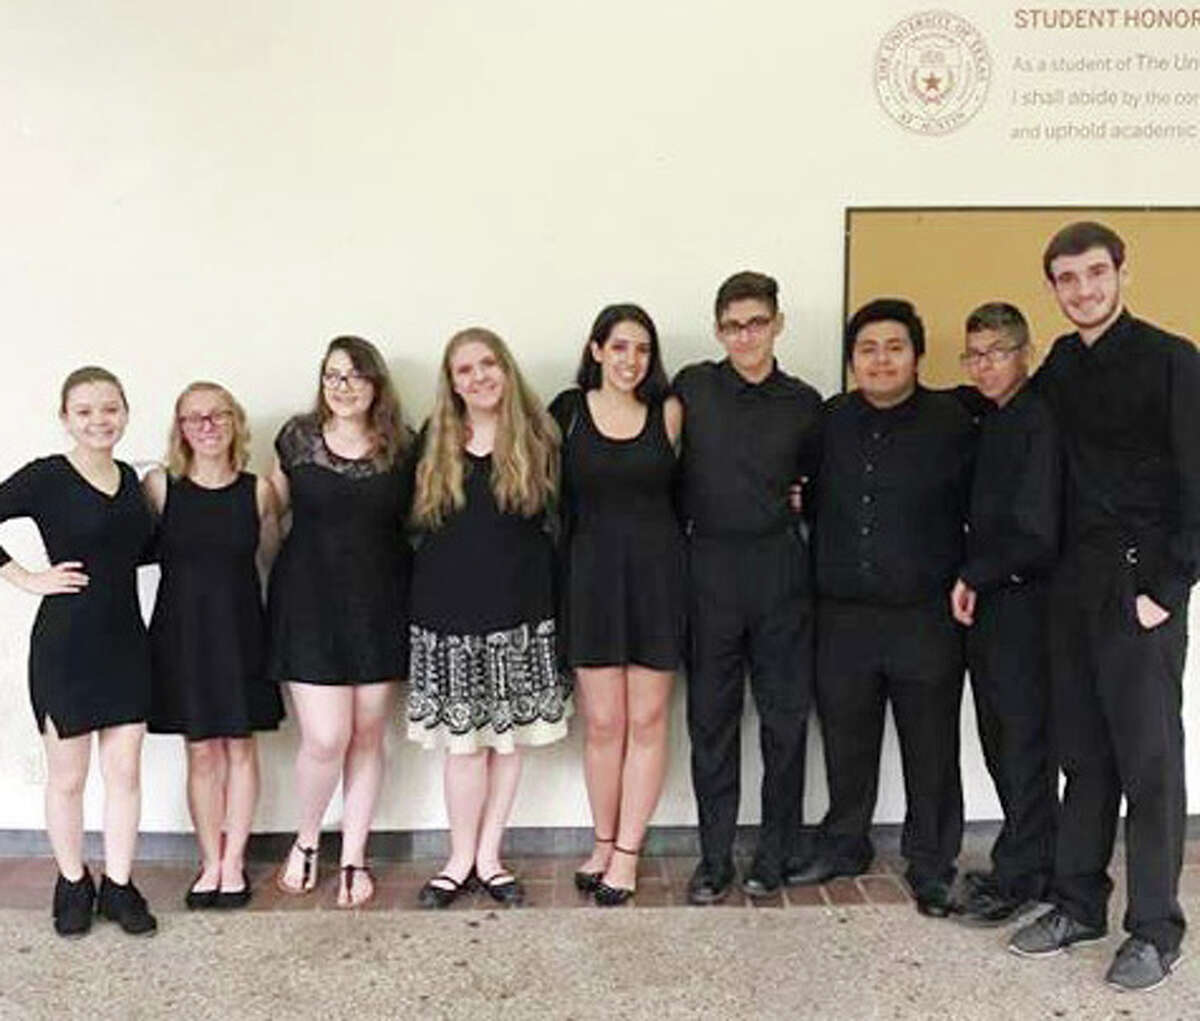 Among the gold medalists from the Plainview High School Choir at State UIL Solo and Ensemble Contest in the University of Texas in Austin was a group of madrigals -- Sage Landeros (left), Lizzy Taylor, Claire Daily, Emily Franklin, Erin Wilkinson, JJ Rodriguez, Abraham Molina, Timothy Reyes and Avan Doughrity.